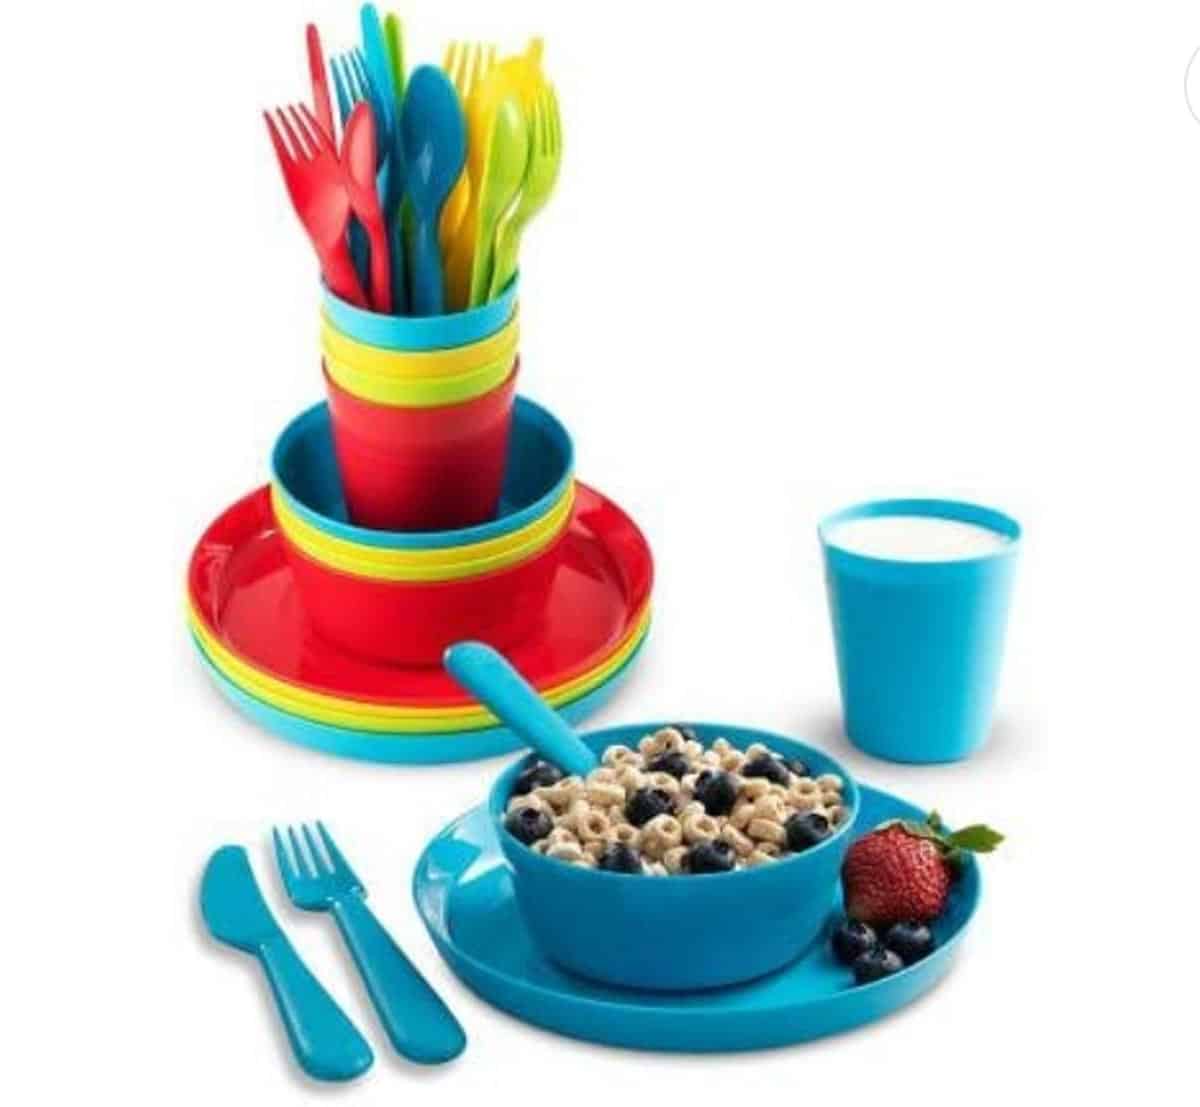 Set of kids bowls, plates, cups and utensils in a rainbow of colors.